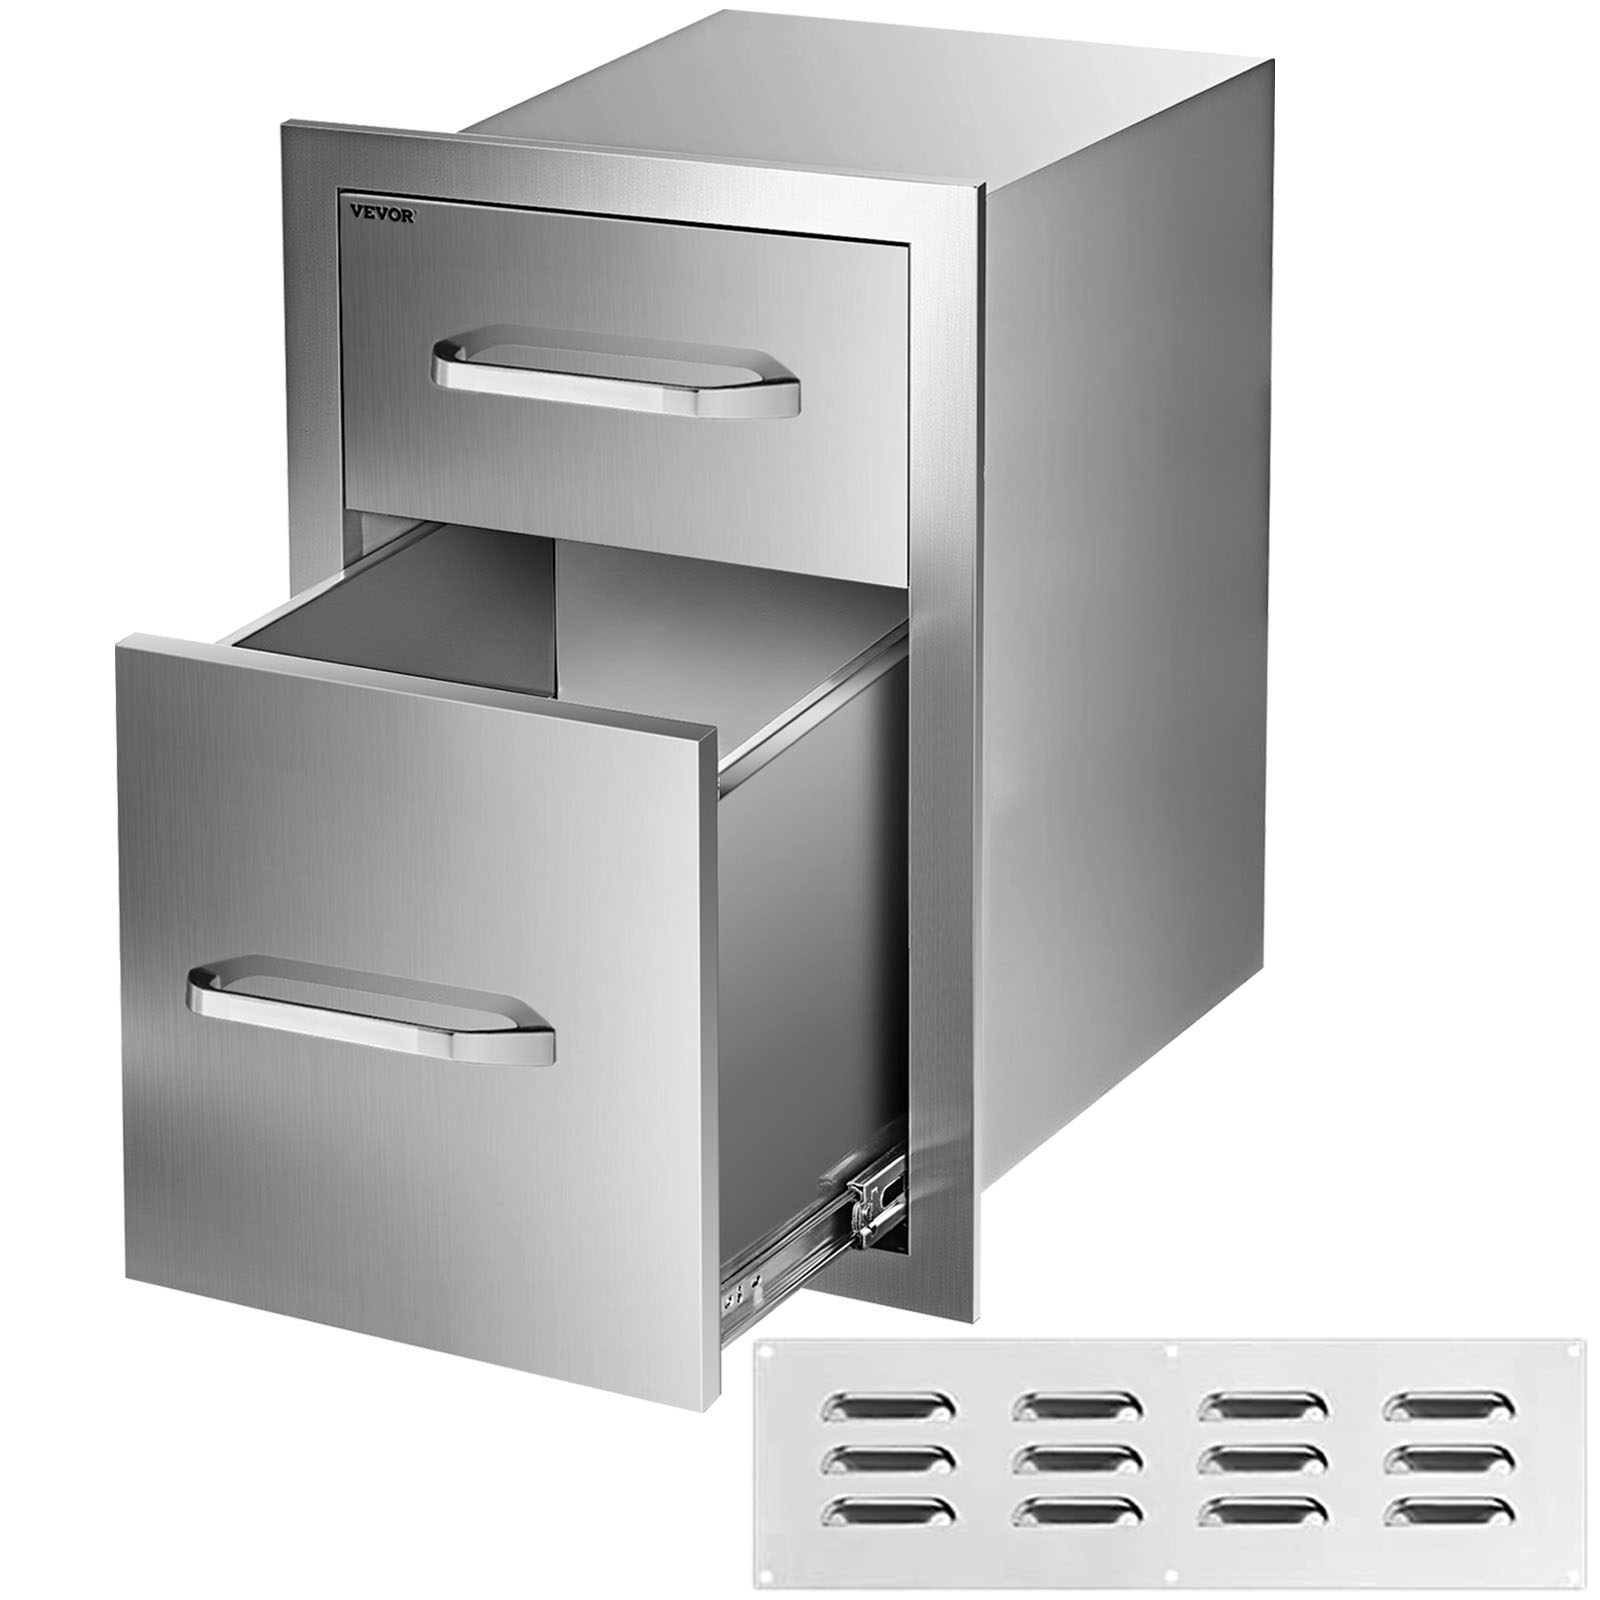 VEVOR Outdoor Kitchen Drawers 13"Wx20.5"Hx21"D, Flush Mount Double Access BBQ Drawers with Stainless Steel Handle, BBQ Island Drawers for Outdoor Kitchens or BBQ Island Patio Grill Station - image 1 of 10